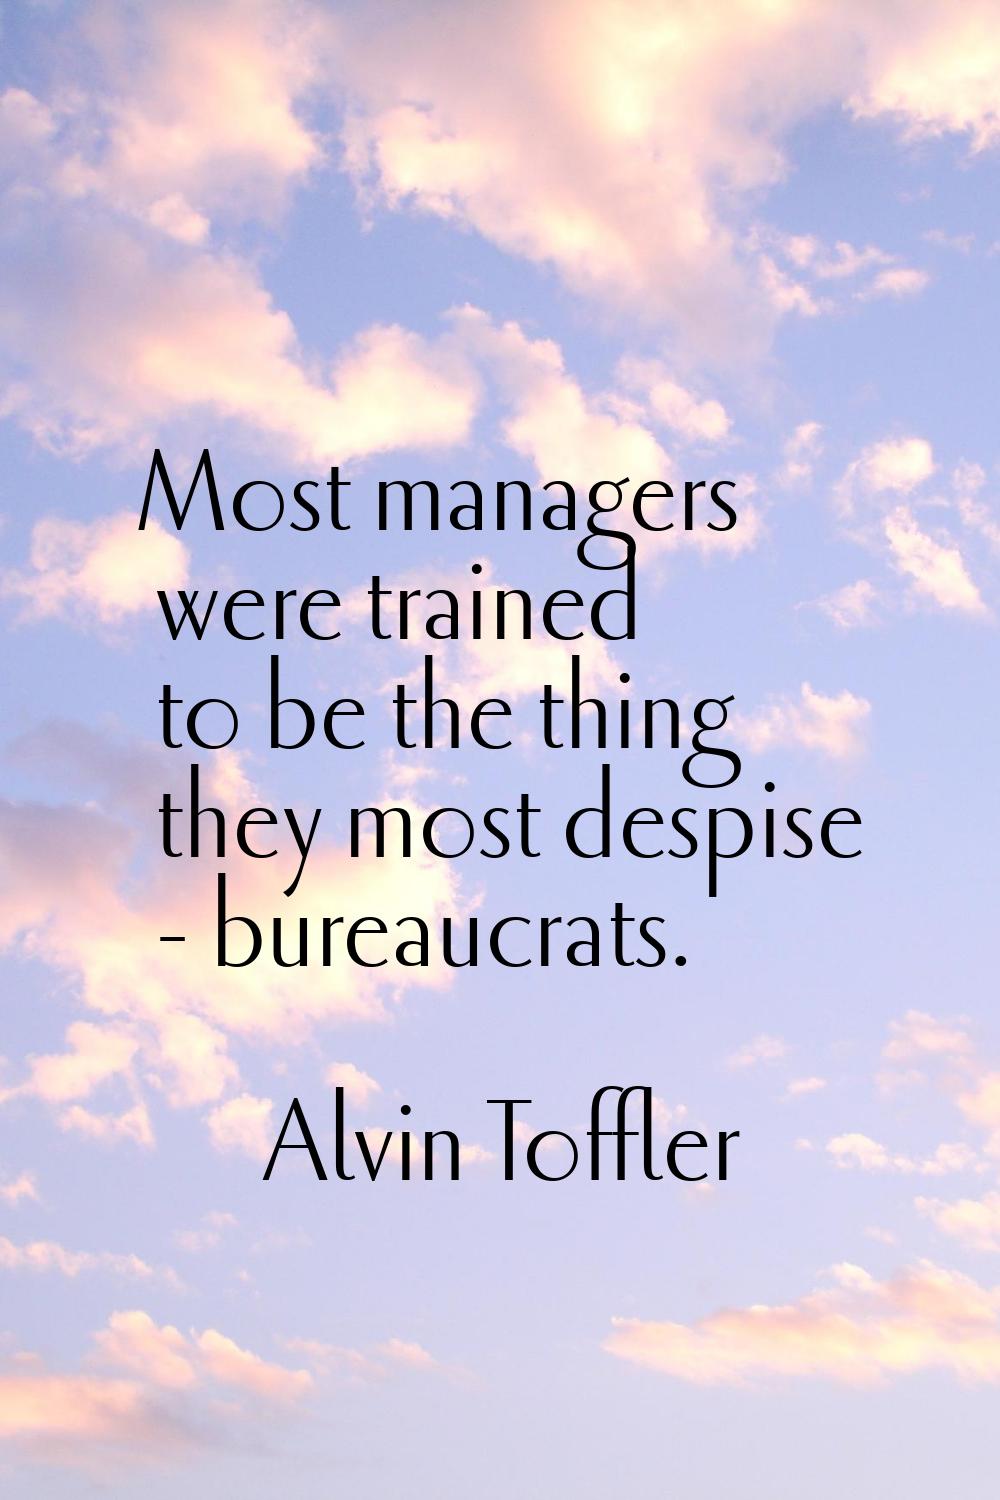 Most managers were trained to be the thing they most despise - bureaucrats.